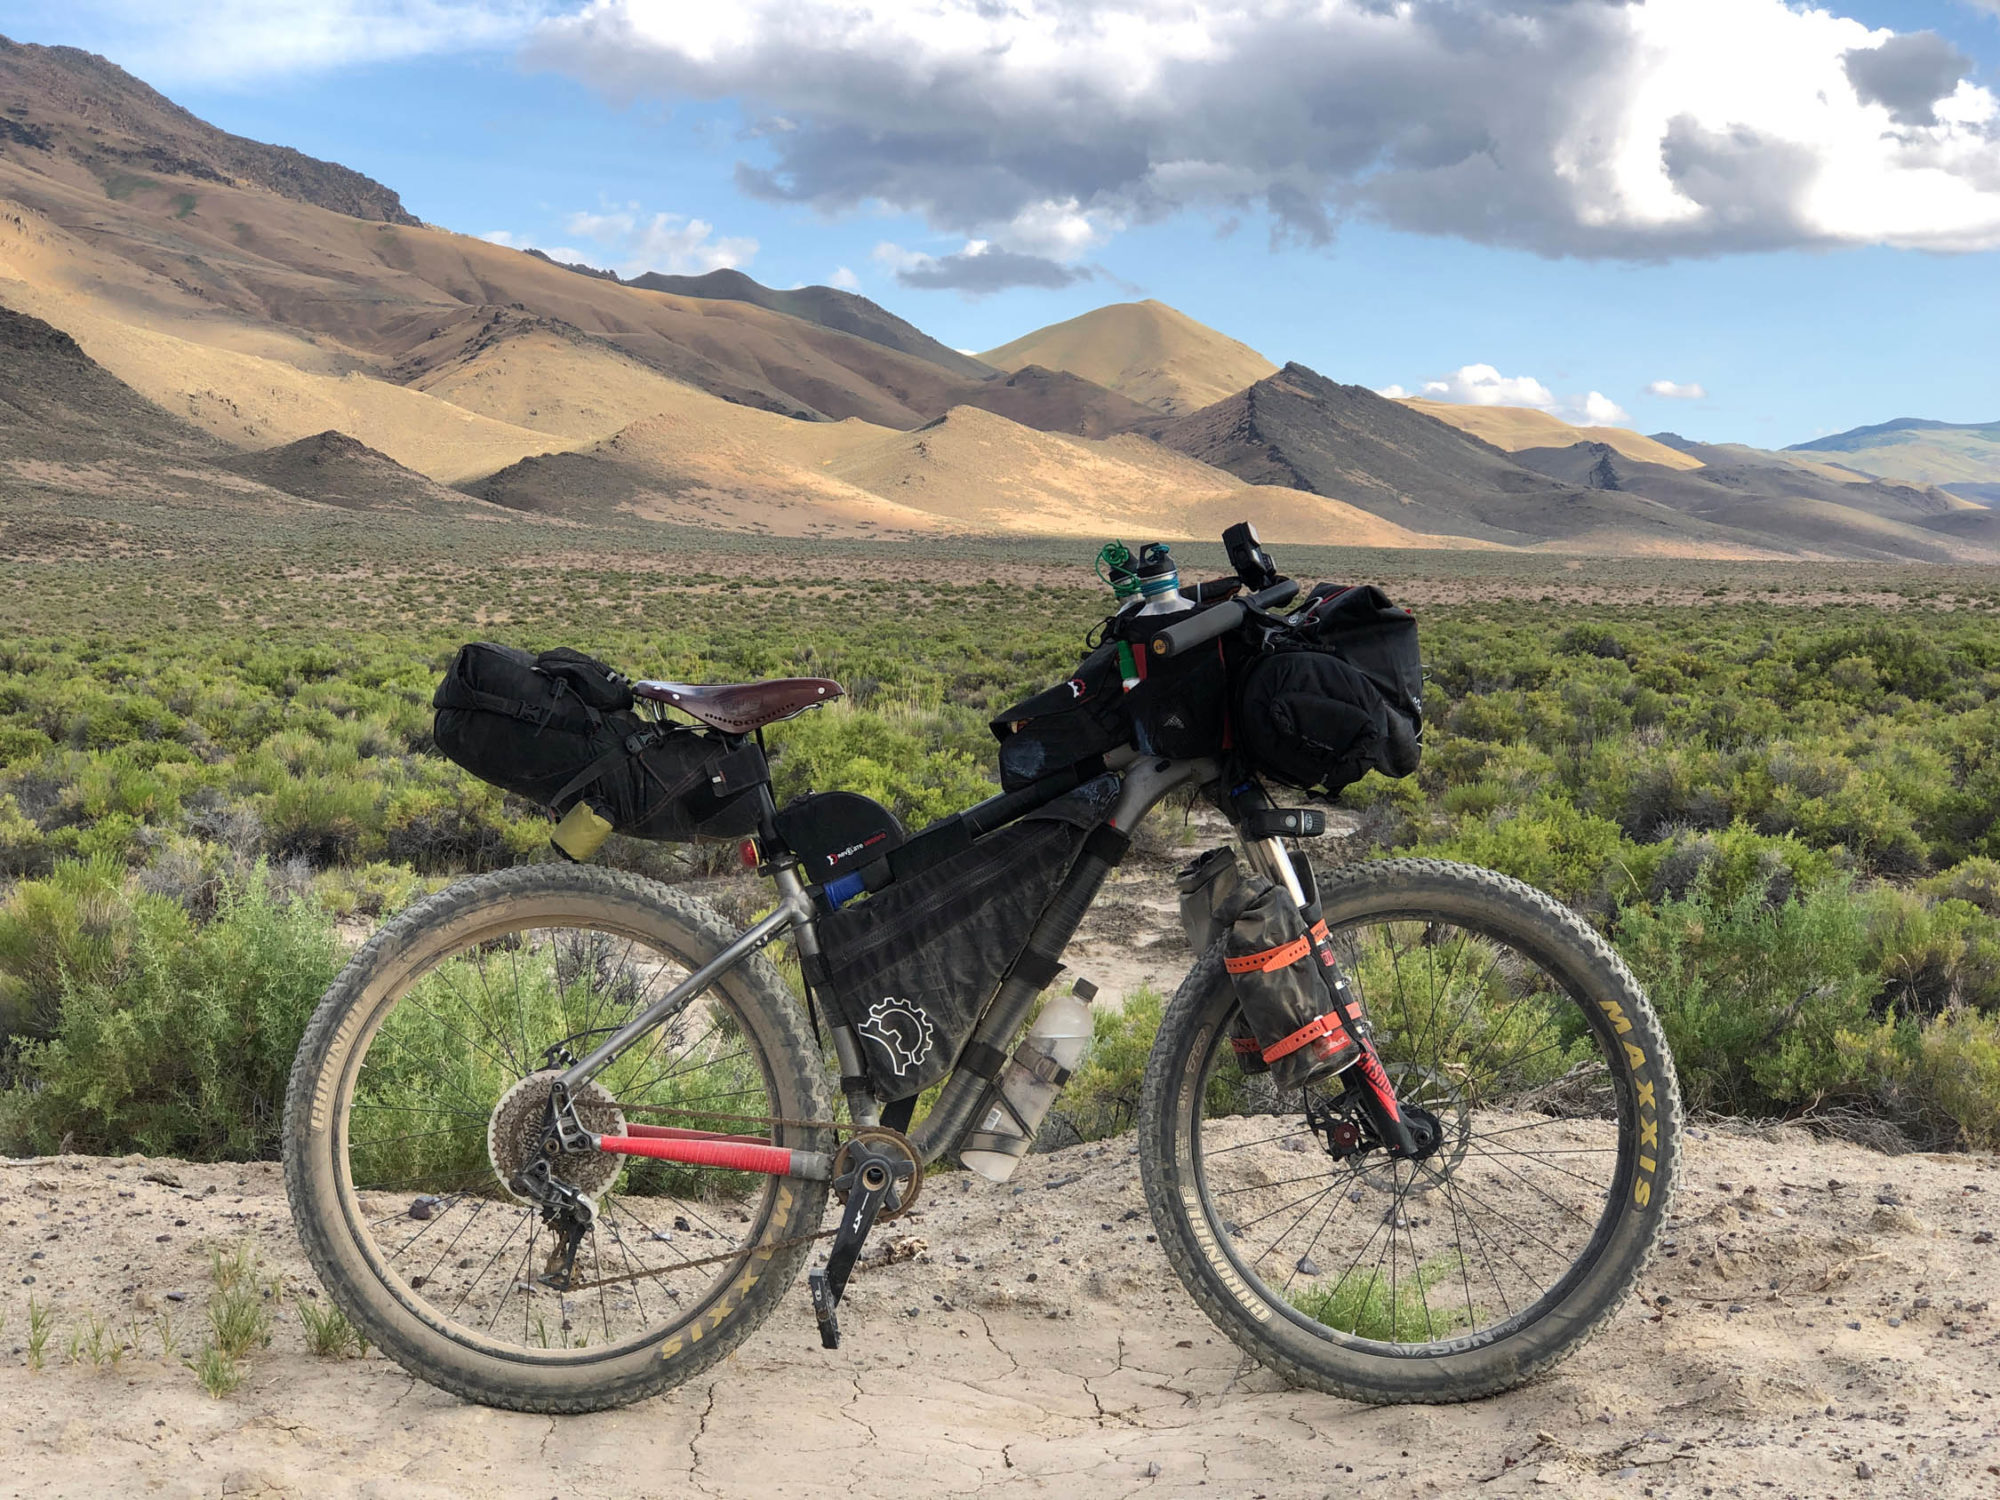 Tomas Quinines, Man found lying in the desert, Oregon Big Country bikepacking